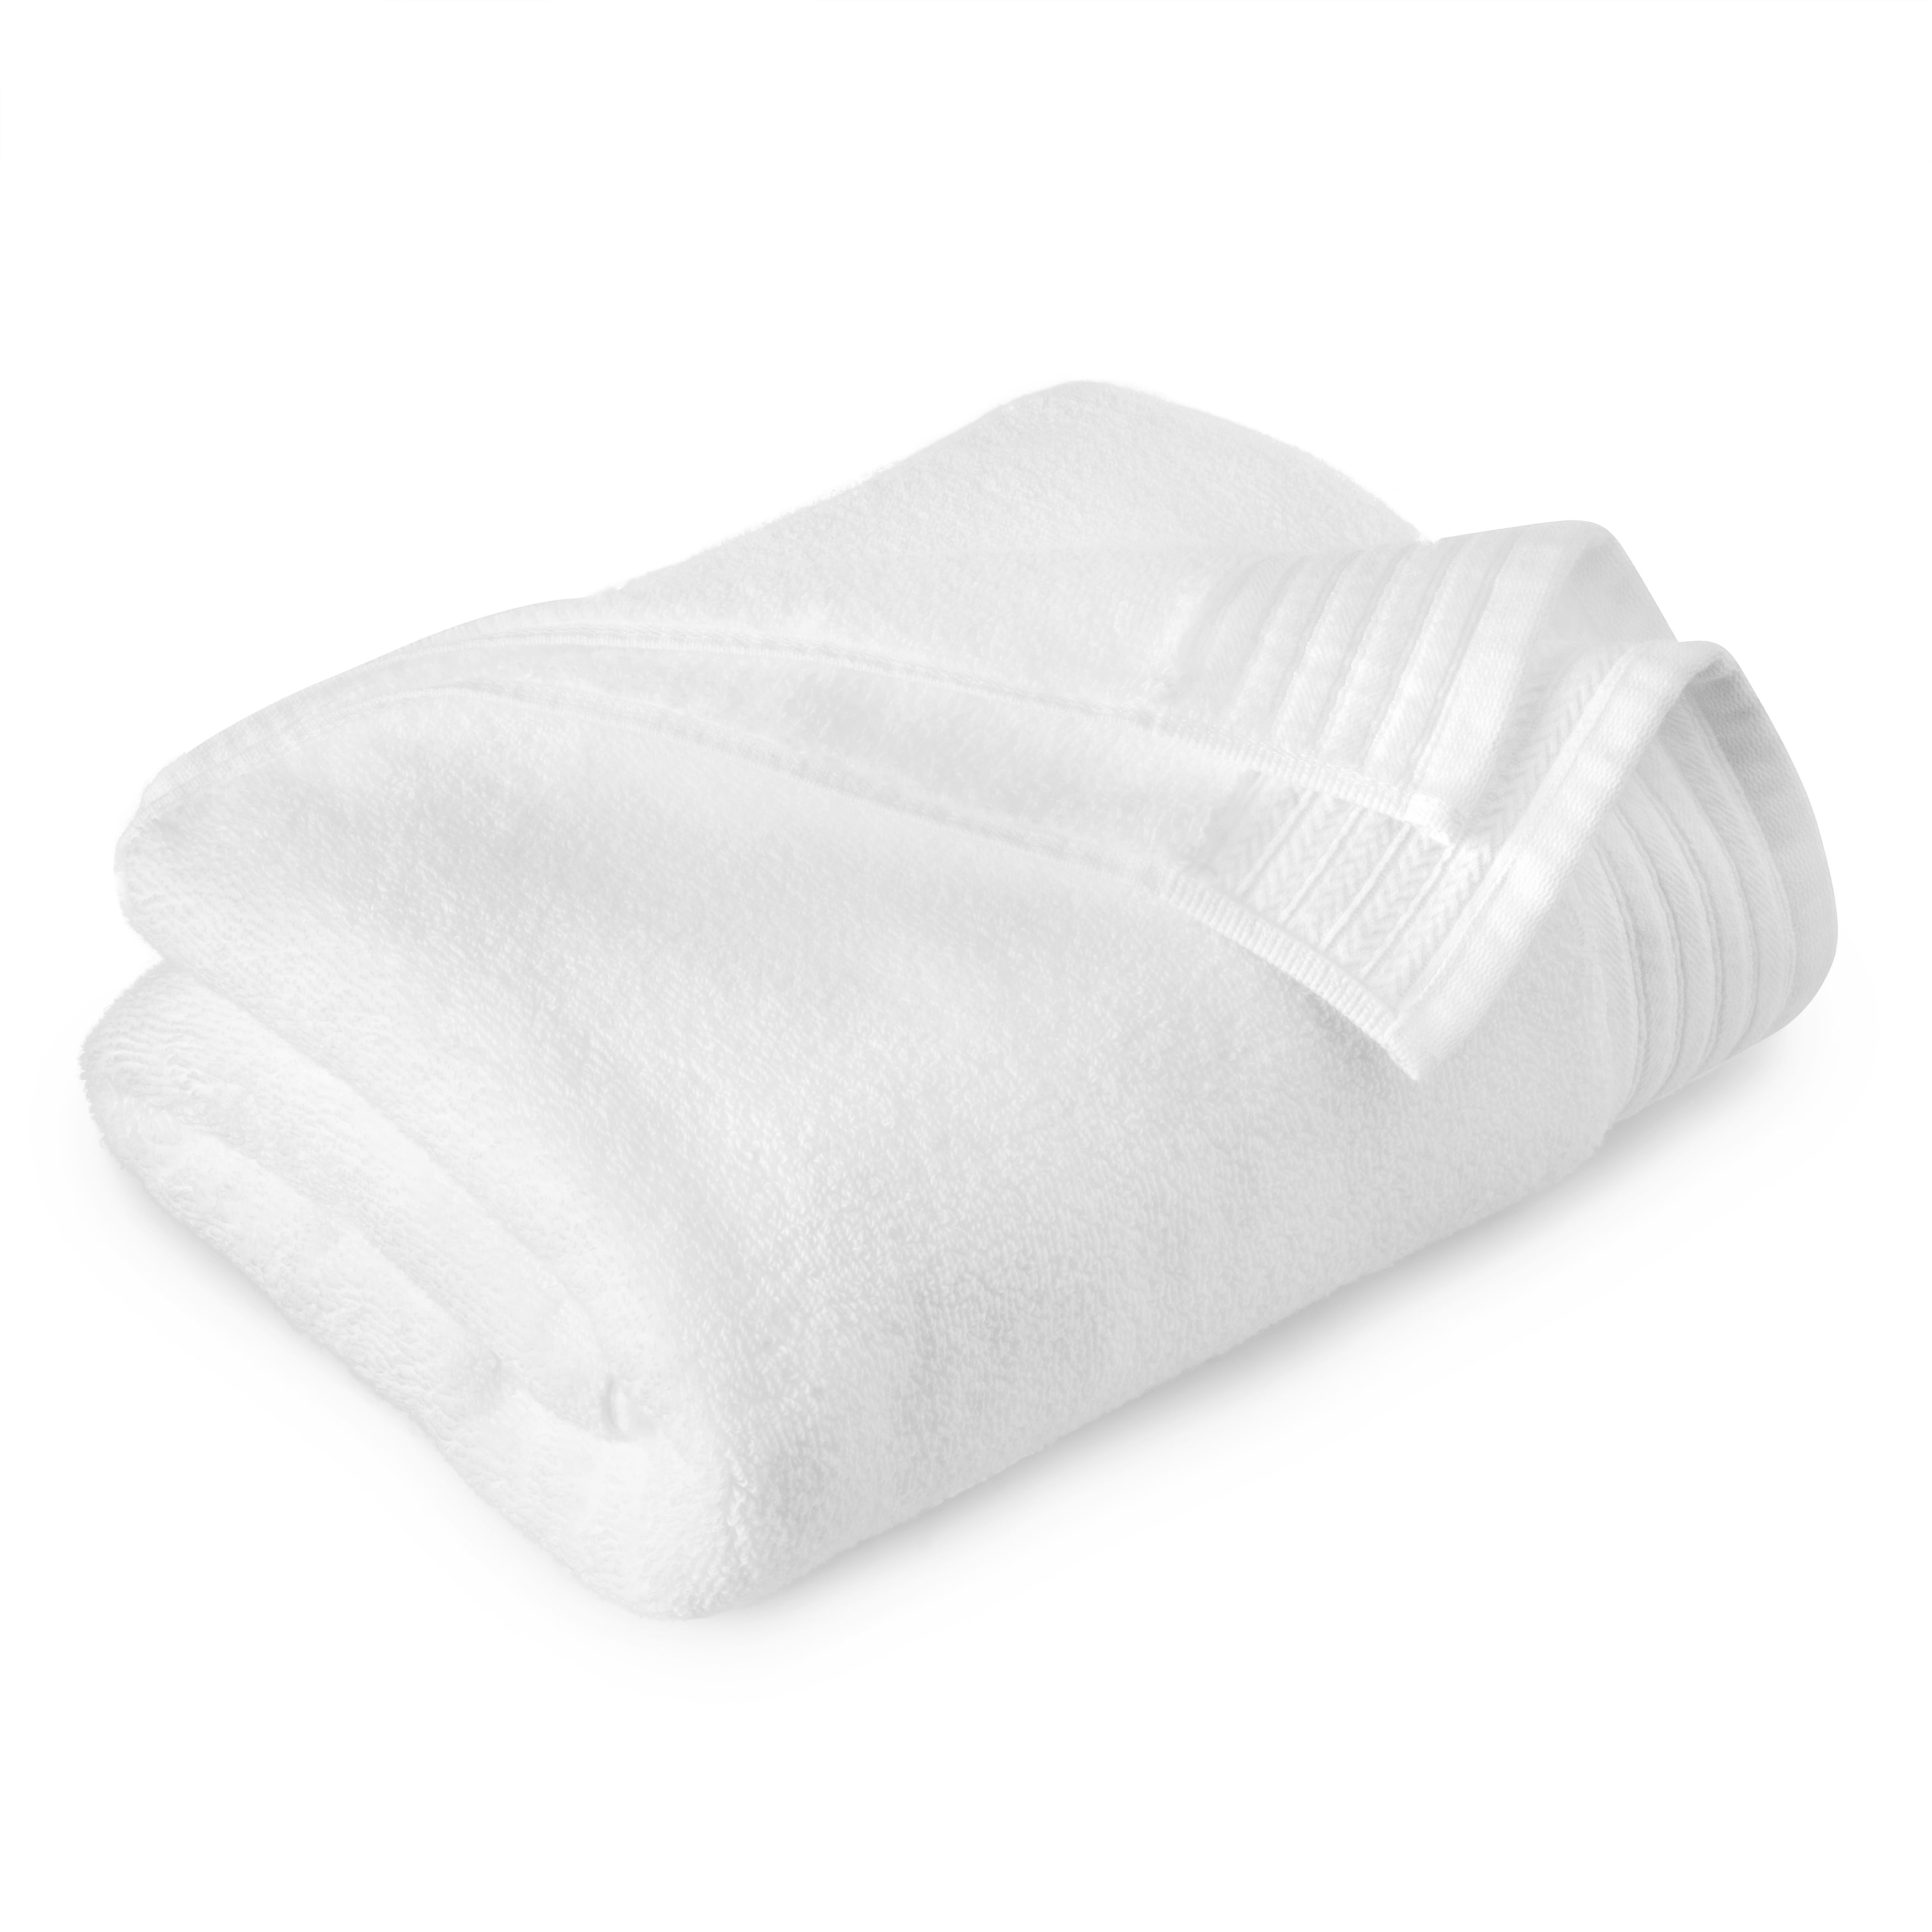 Hotel Quality 750 gsm Egyptian Cotton Towels Face Cloth Hand Bath & Bath Sheets 